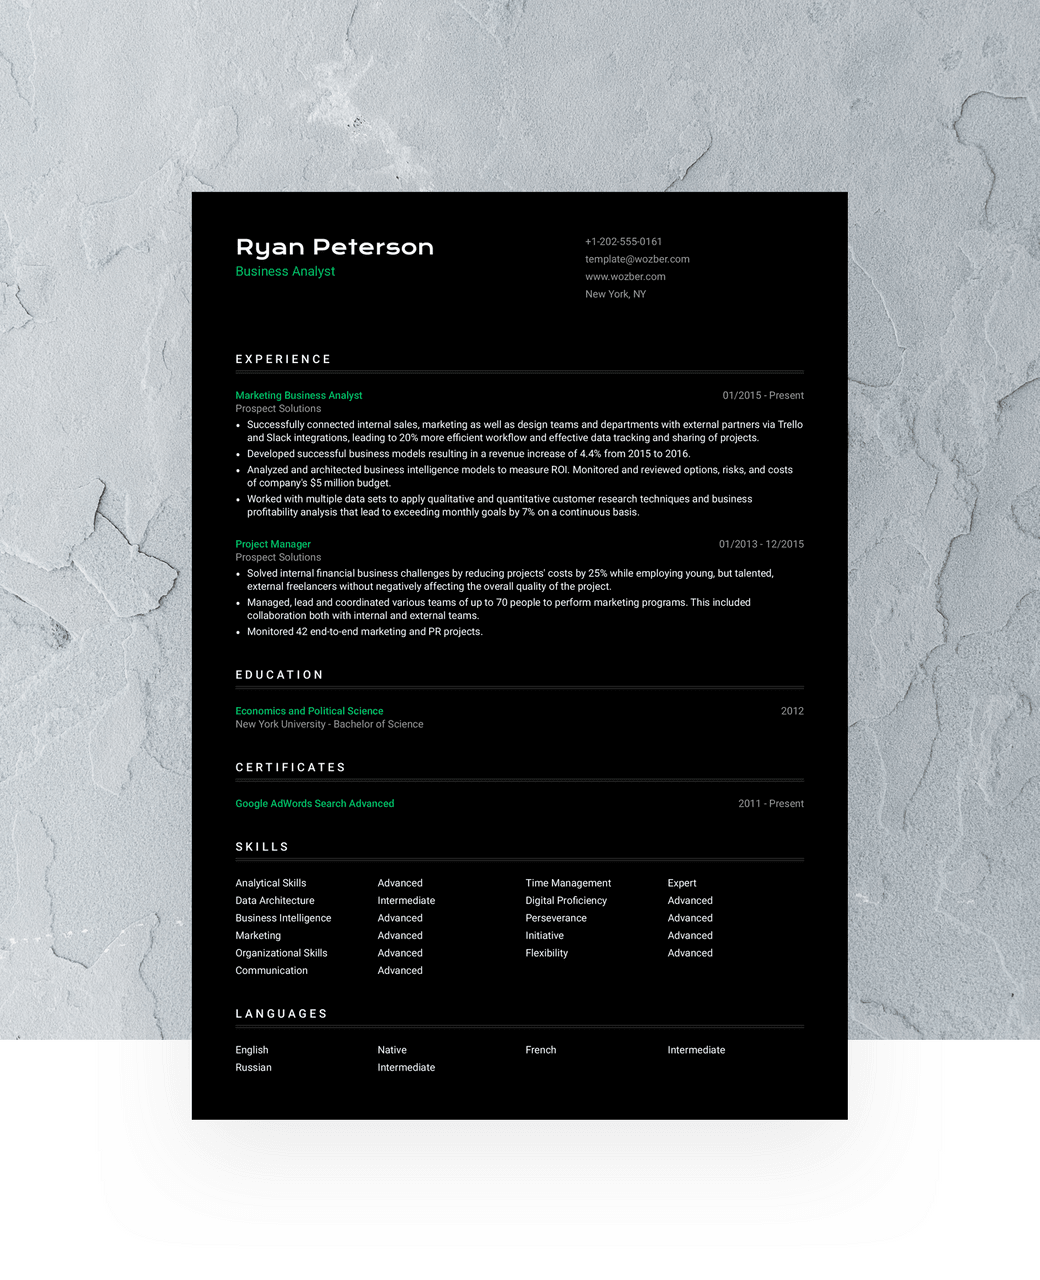 The most creative and unique resume template we offer.